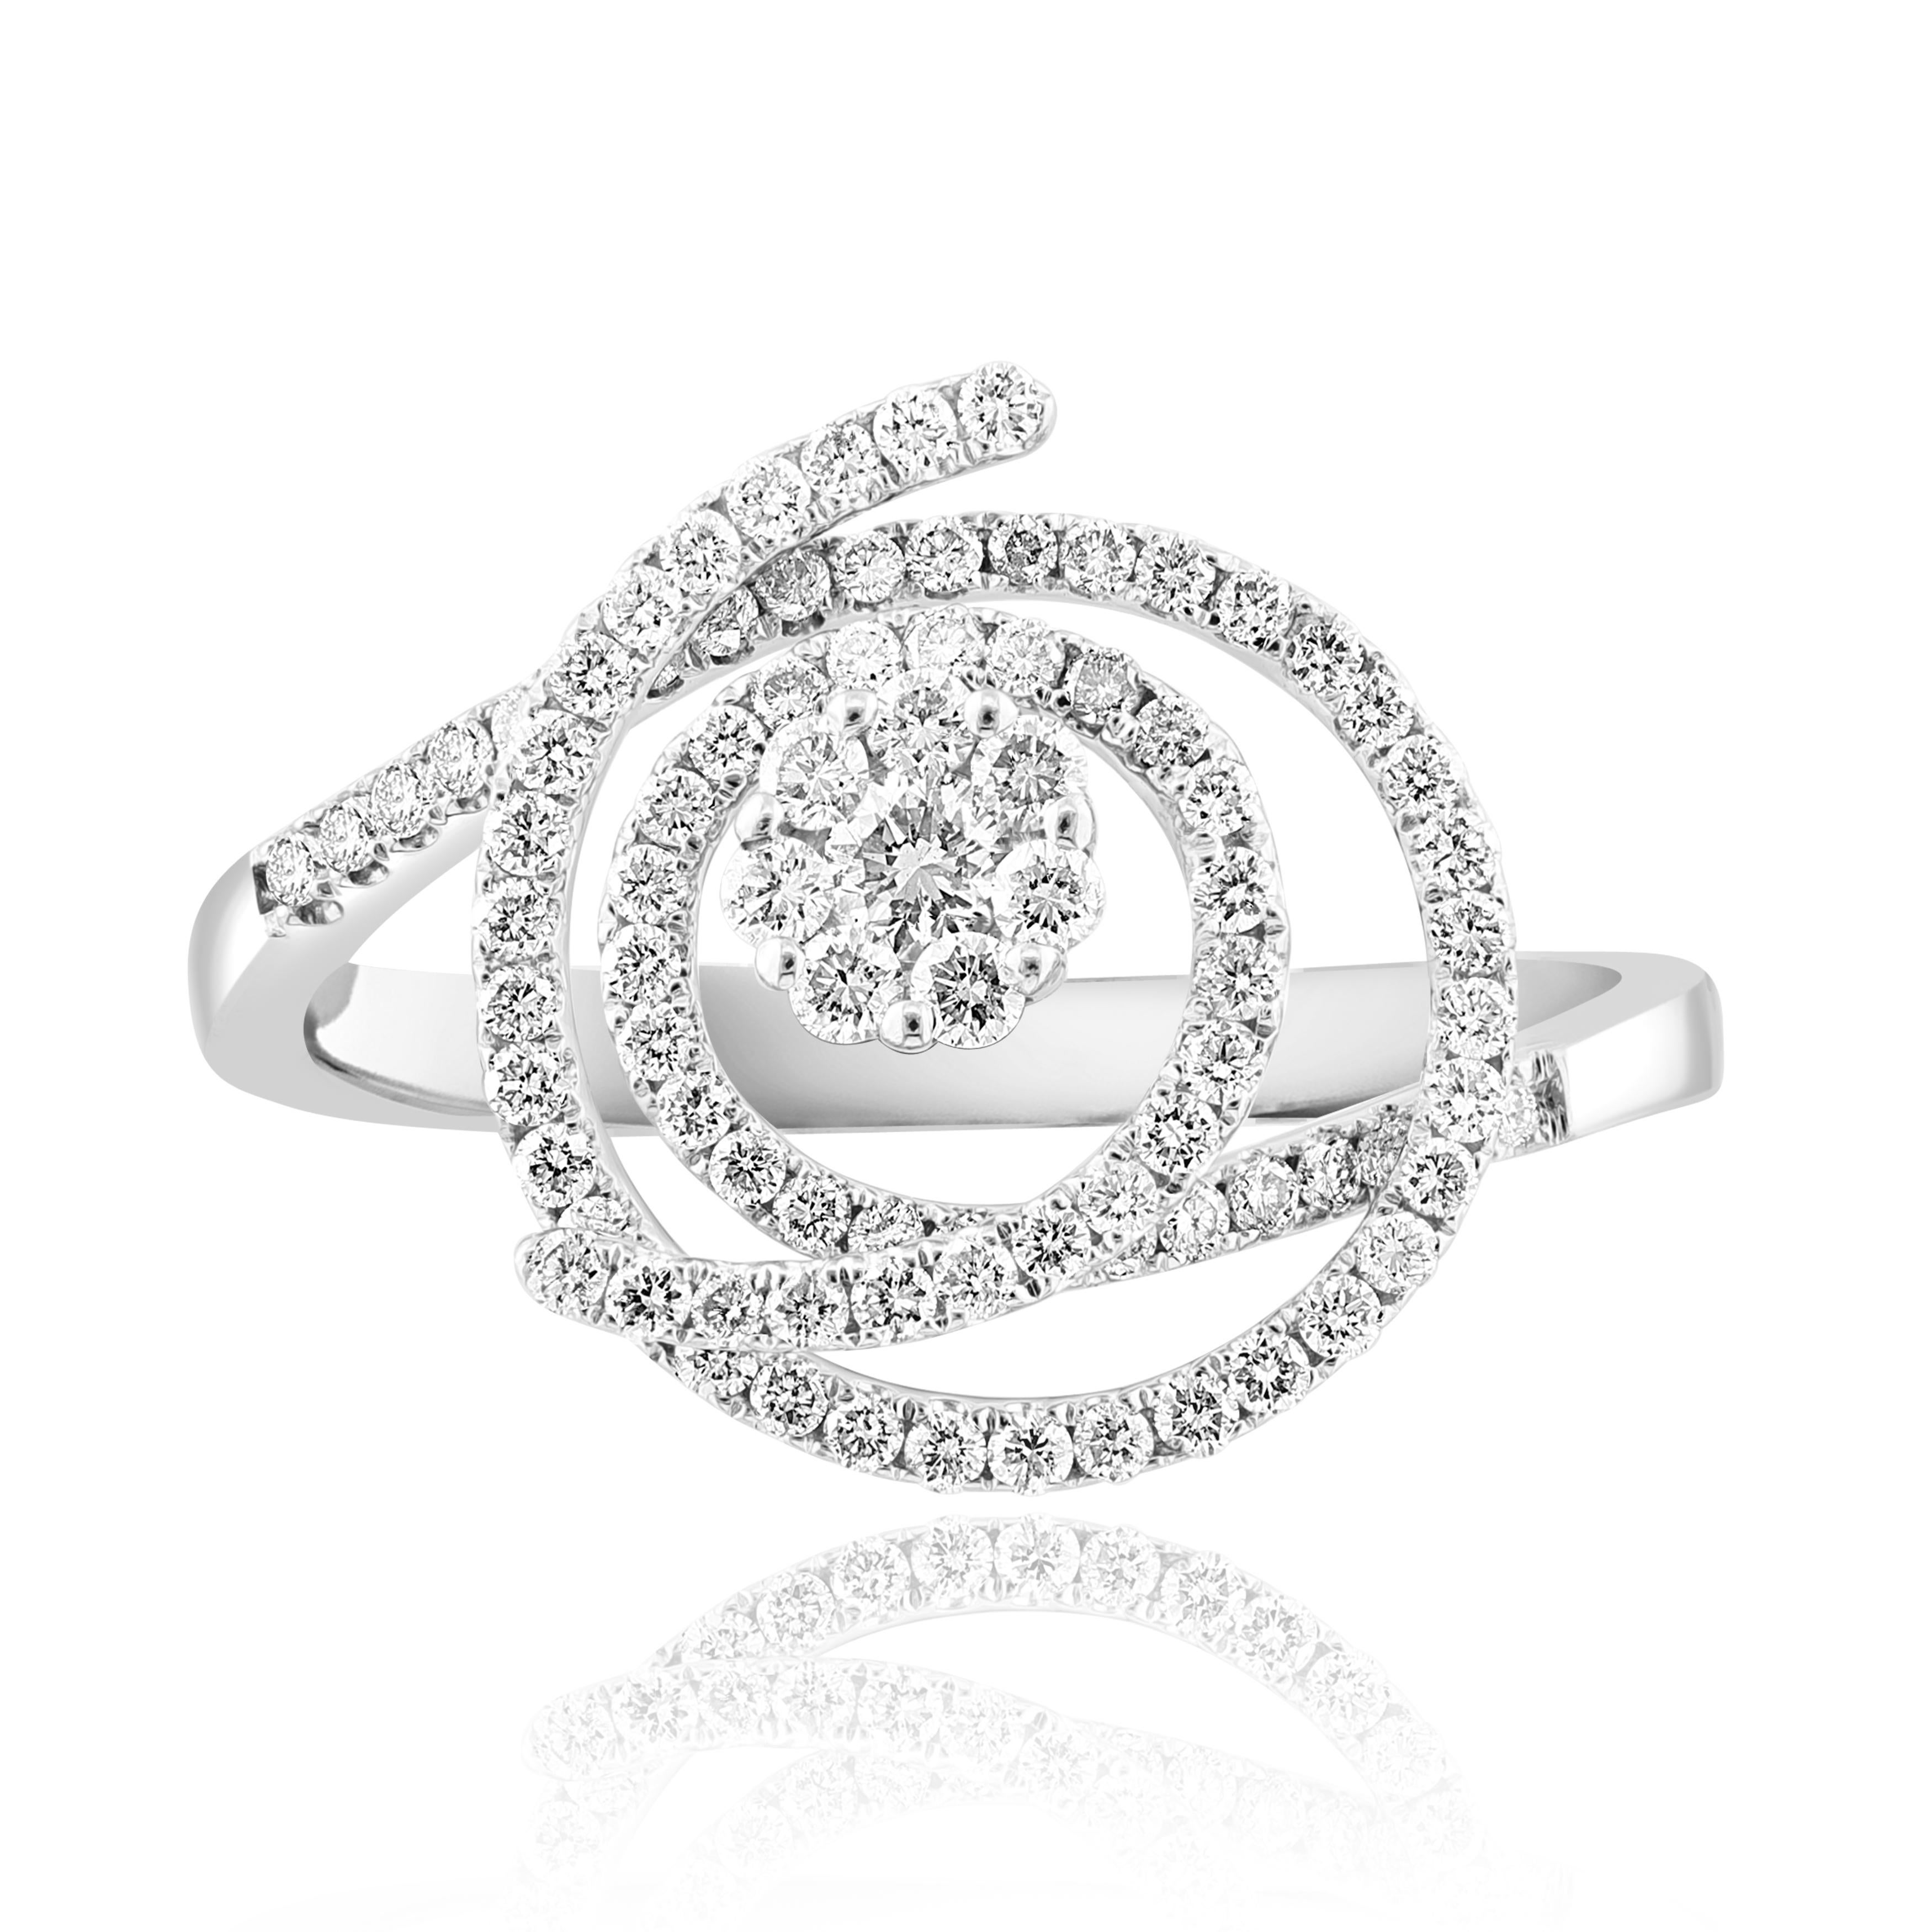 This fashion ring with brilliant-cut round diamonds in an open work design weighs 1.26 carats. 86 accent diamonds are beautifully set up in an intricate open-work design and is made of 18K White Gold.